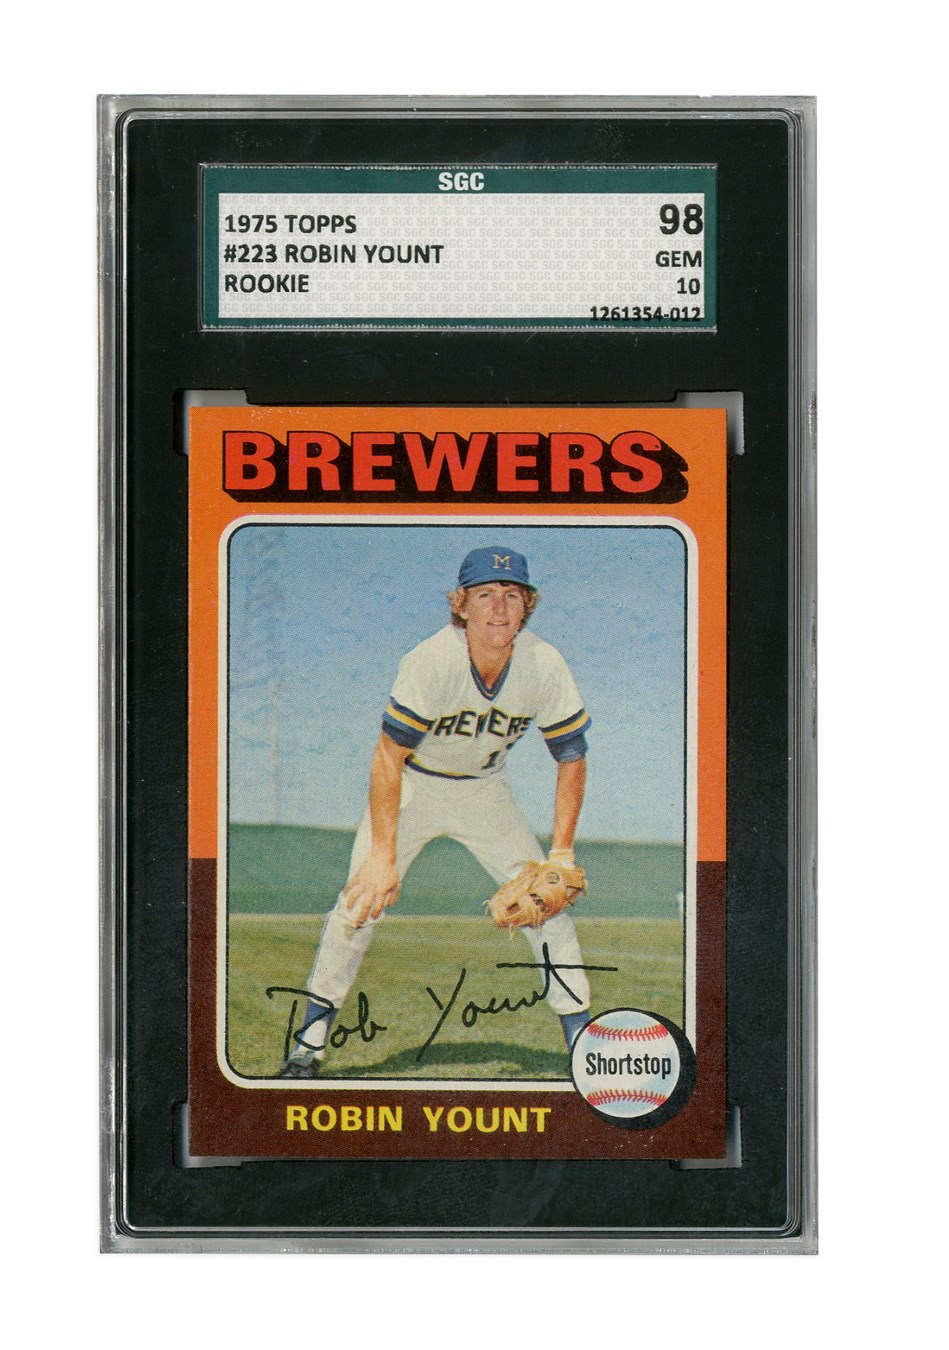 Baseball and Trading Cards - 1975 Topps #223 Robin Yount Rookie SGC 98 GEM MINT 10